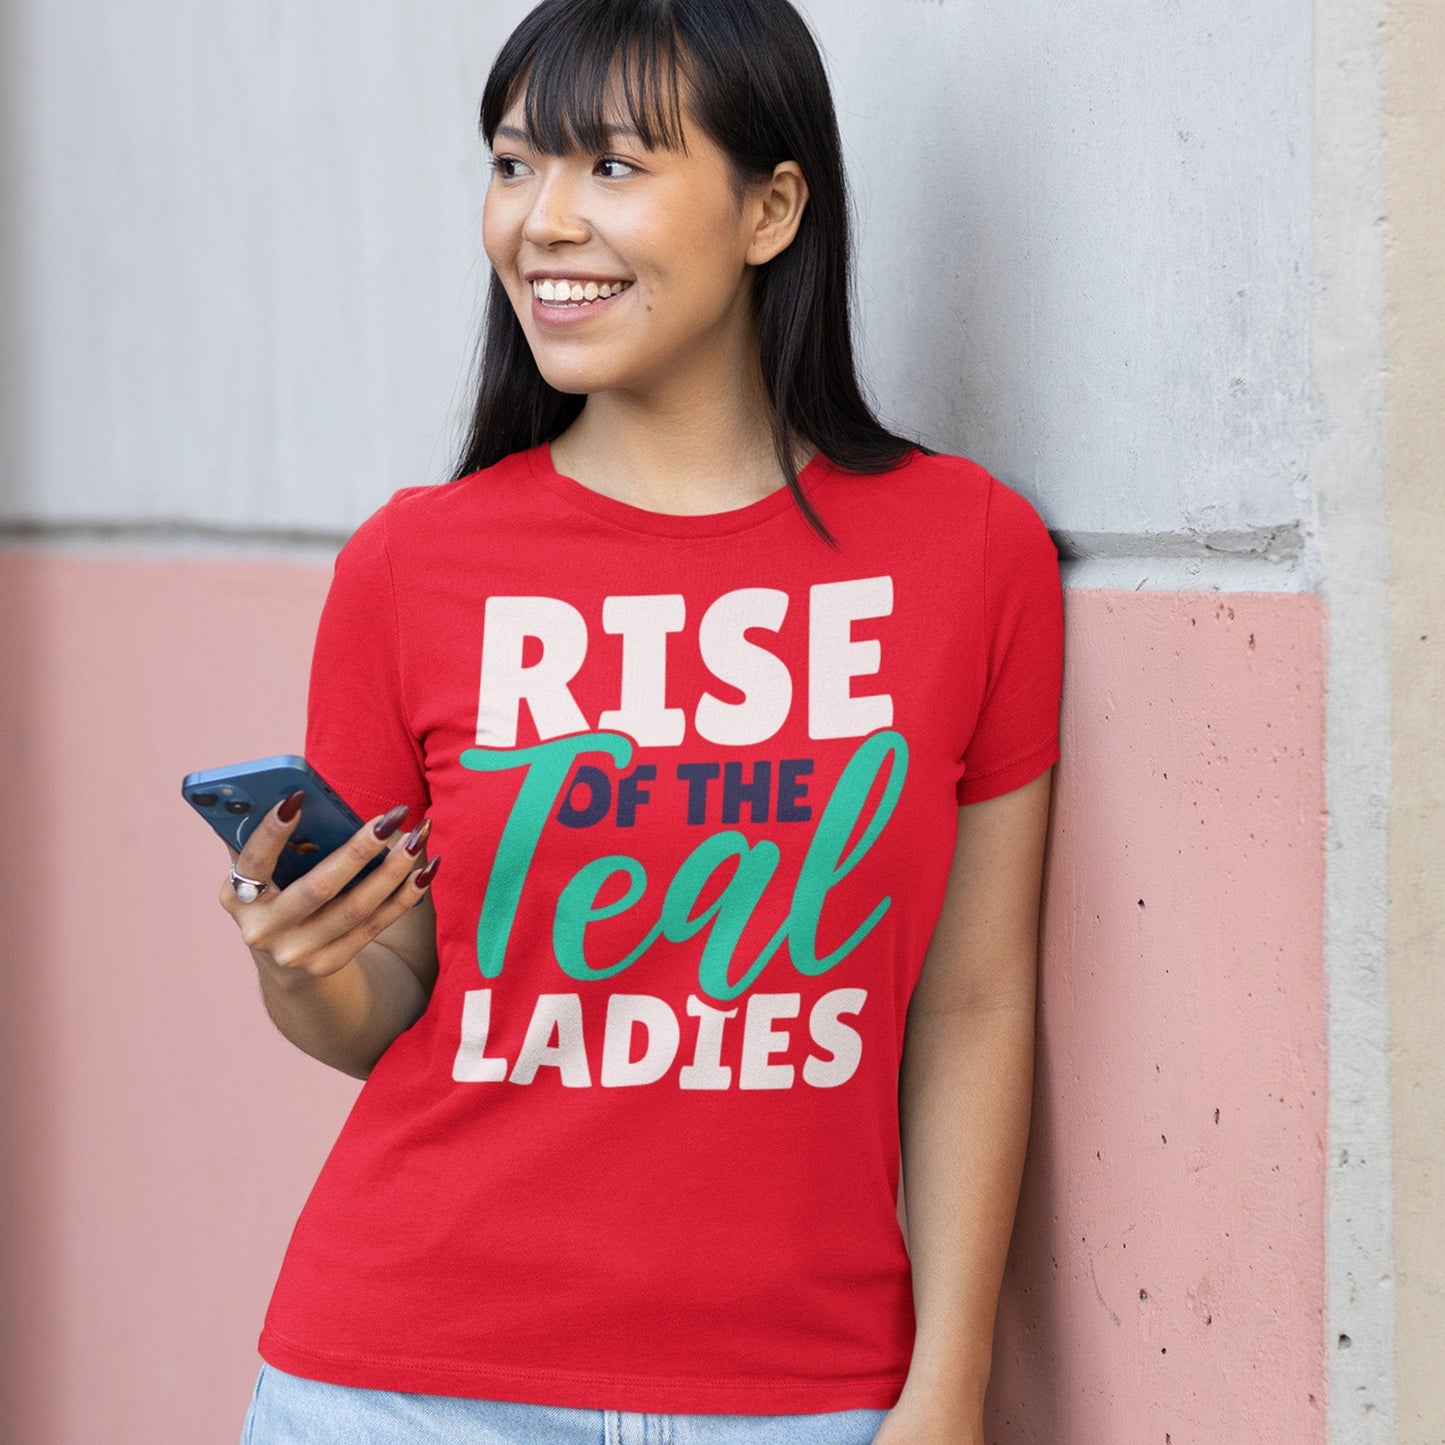 KC Swag Kansas City Current RISE OF THE TEAL LADIES on red unisex t-shirt worn by female model leaning on pink concrete wall while holding phone